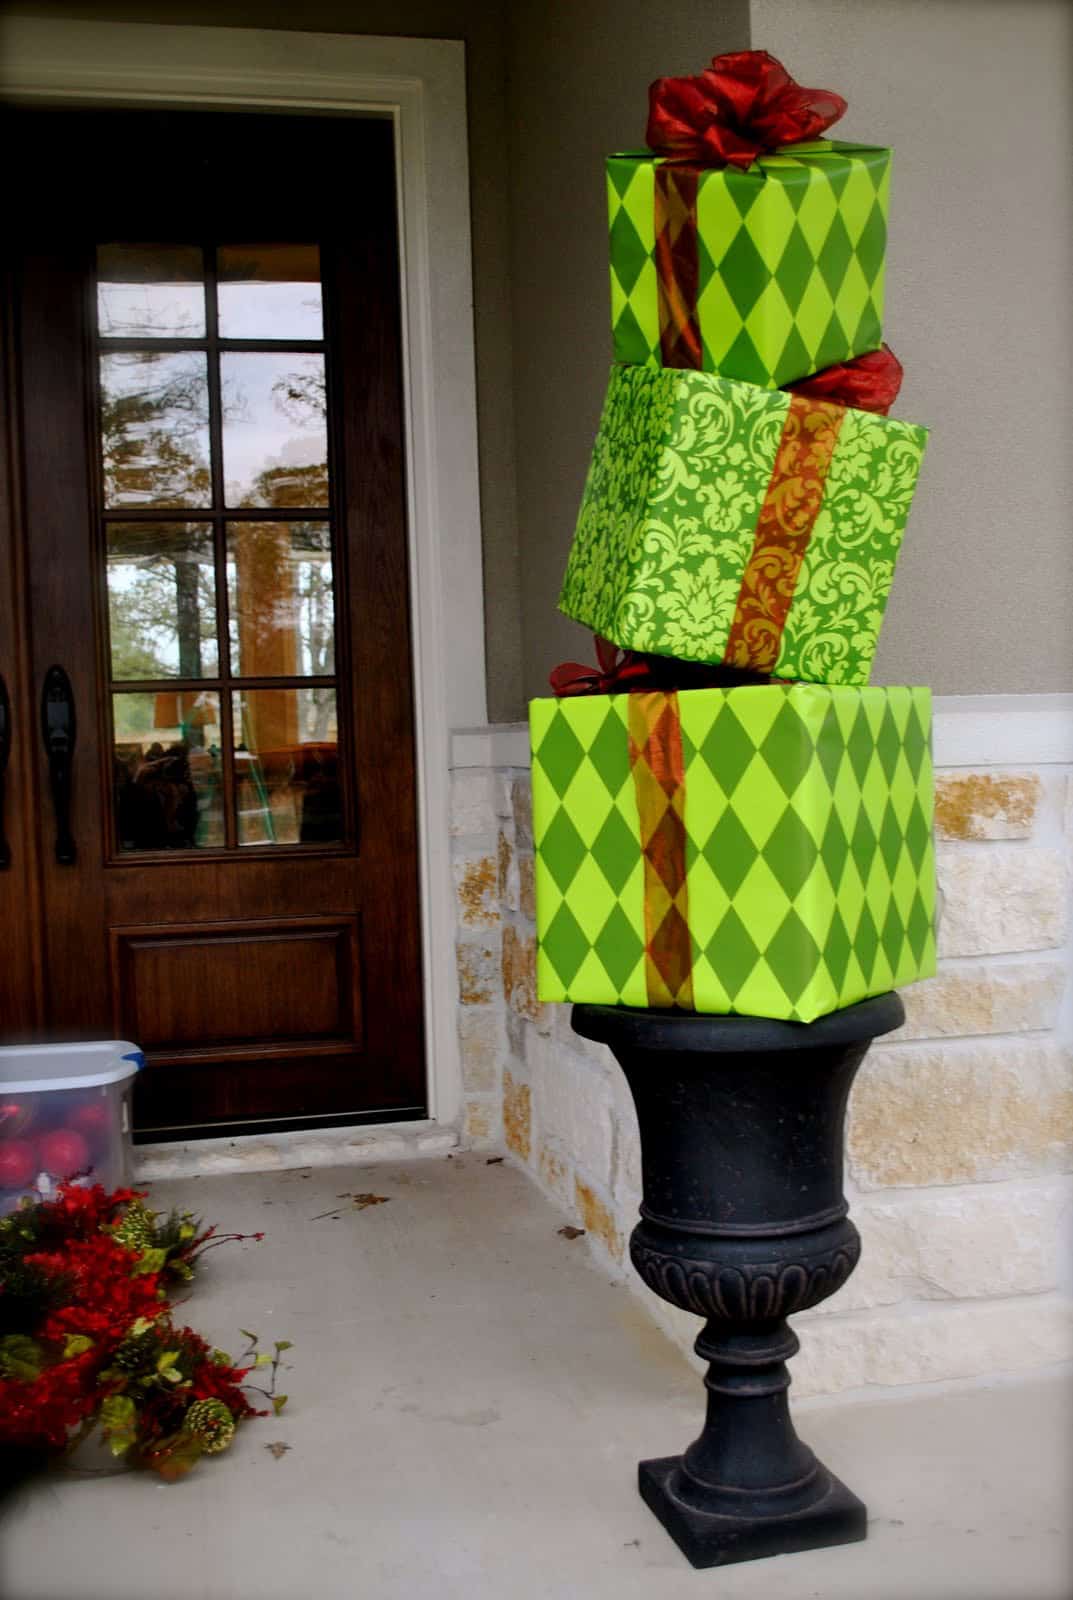 merry-christmas-gift-wrapped-boxes-in-an-urn